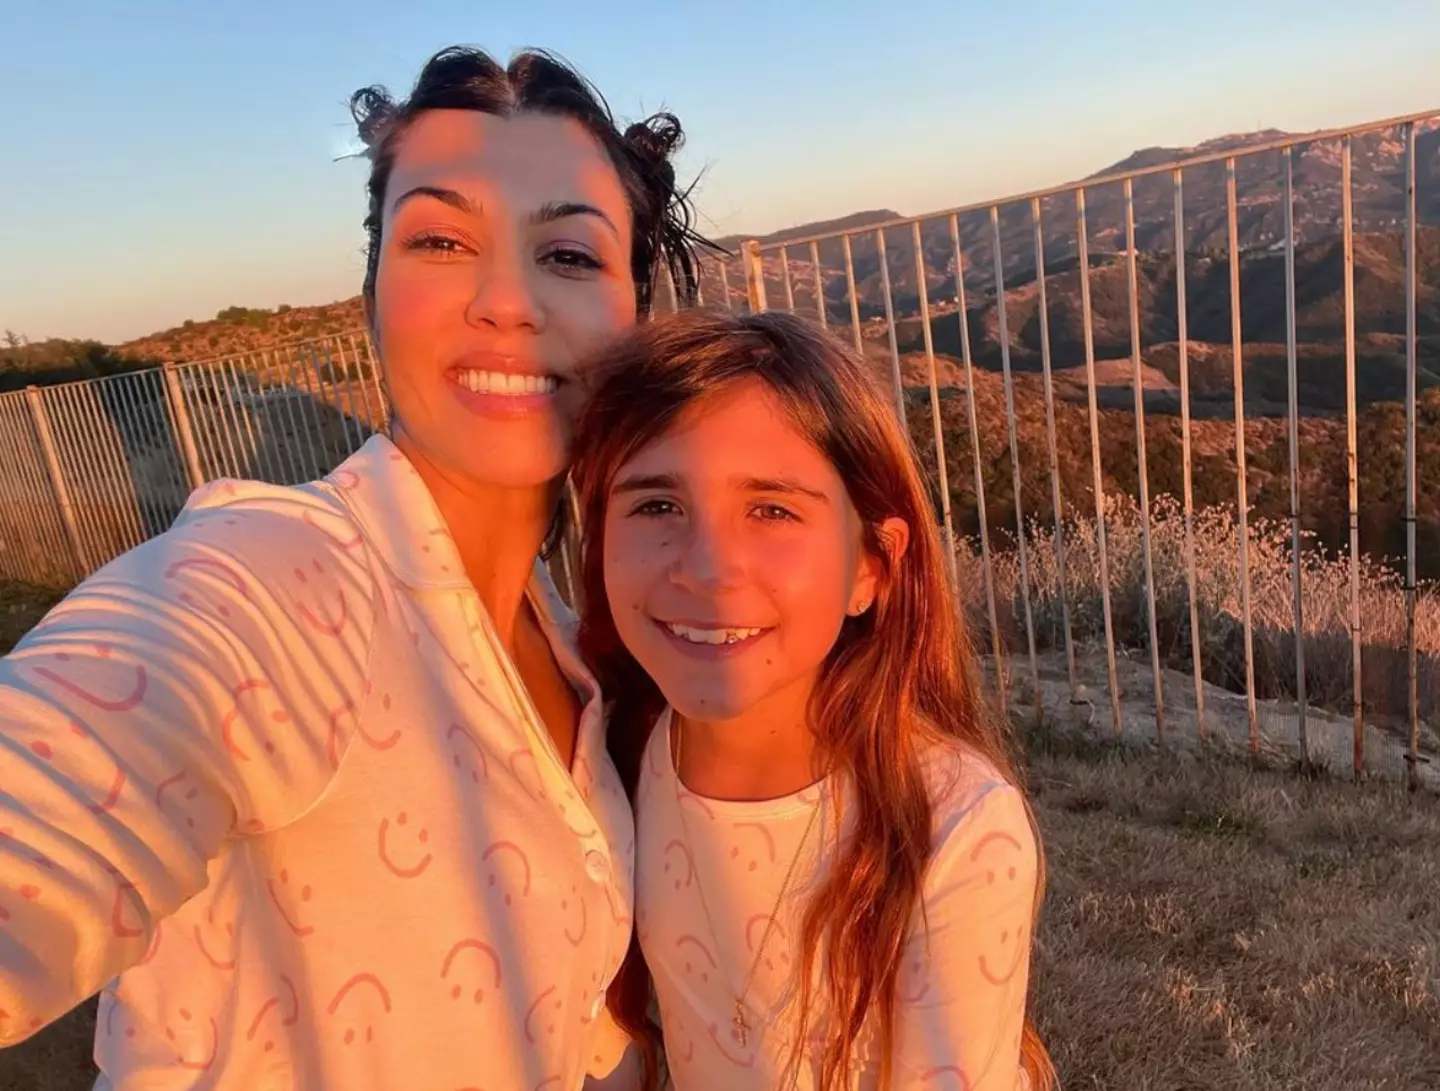 Kourtney has received some criticism on social media.